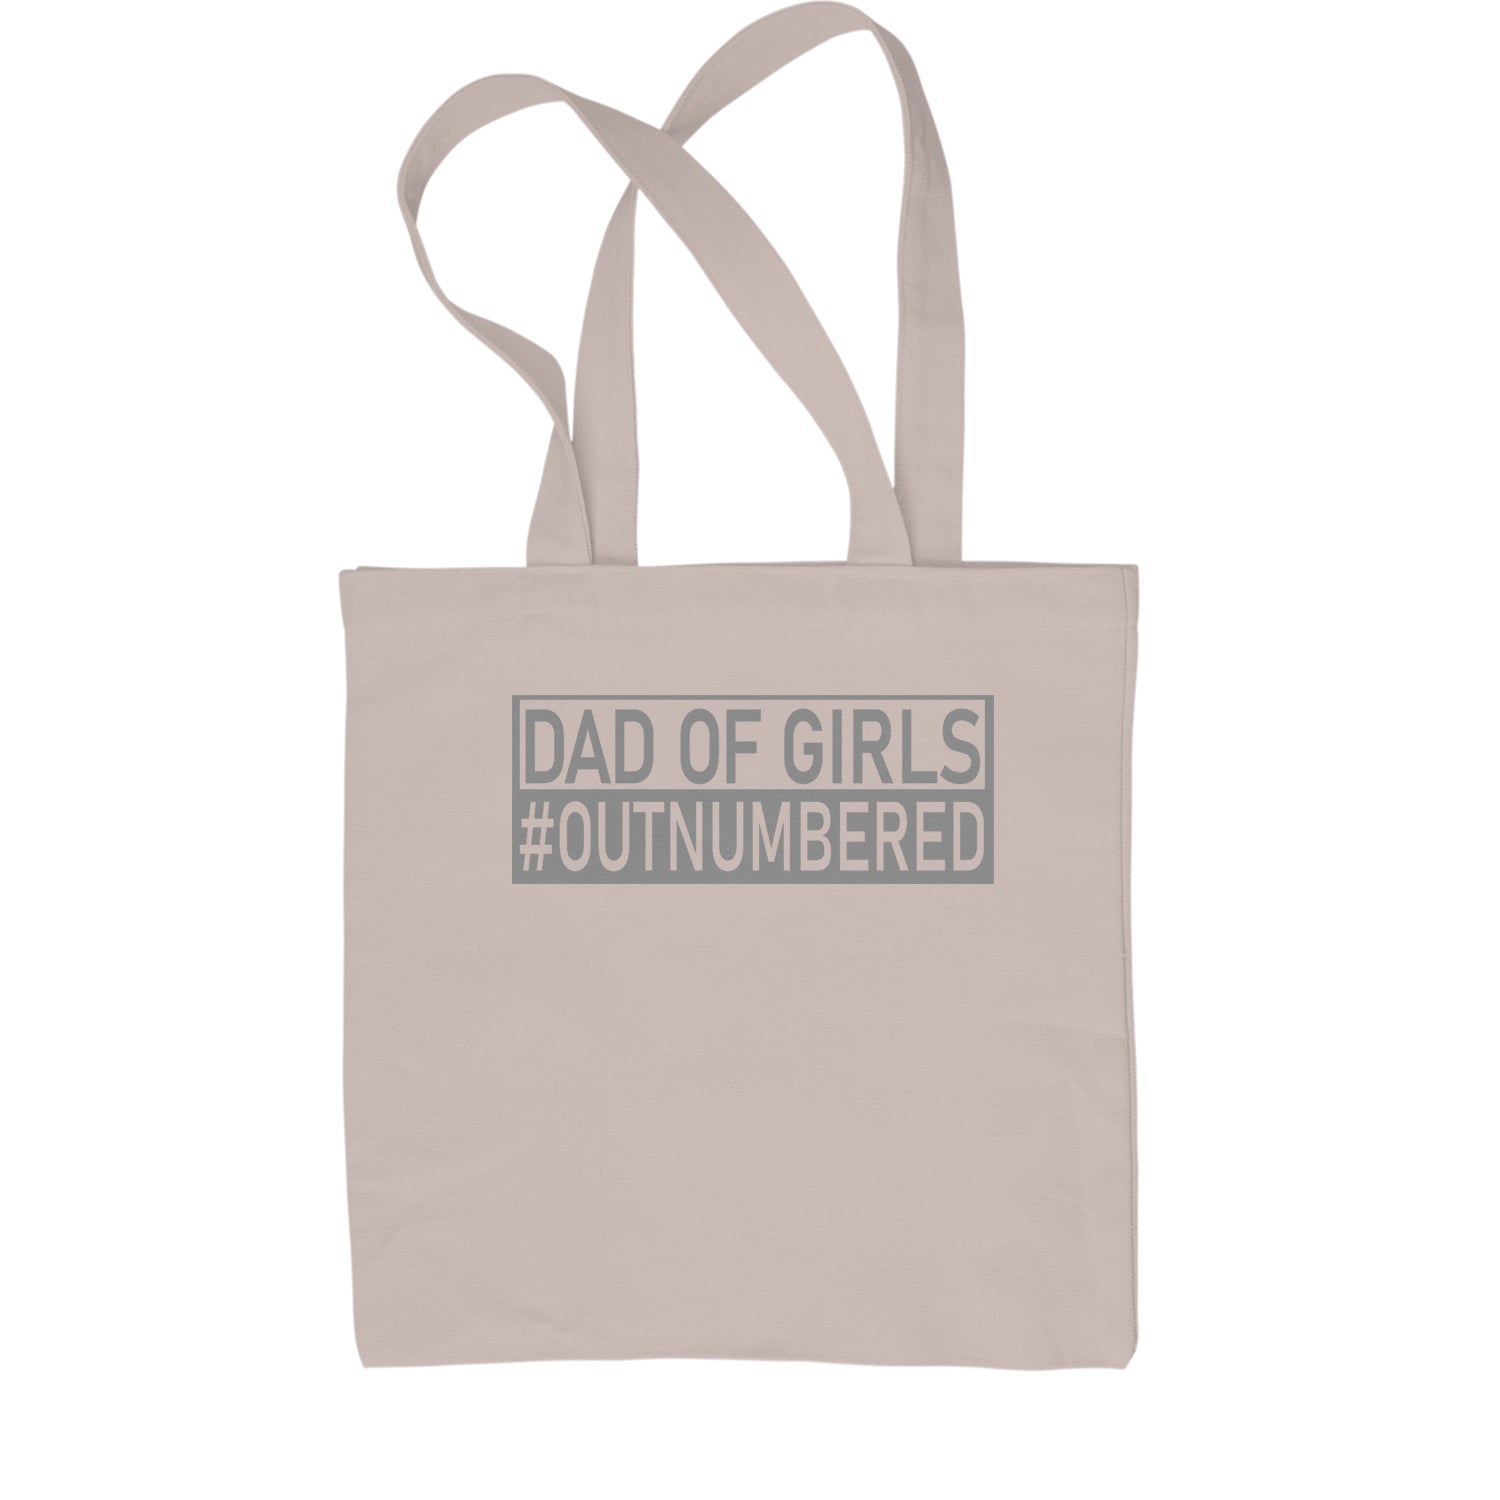 Dad of Girls Shirt for Fathers Day Gift Shopping Tote Bag dad, day, fathers, papa, pop by Expression Tees